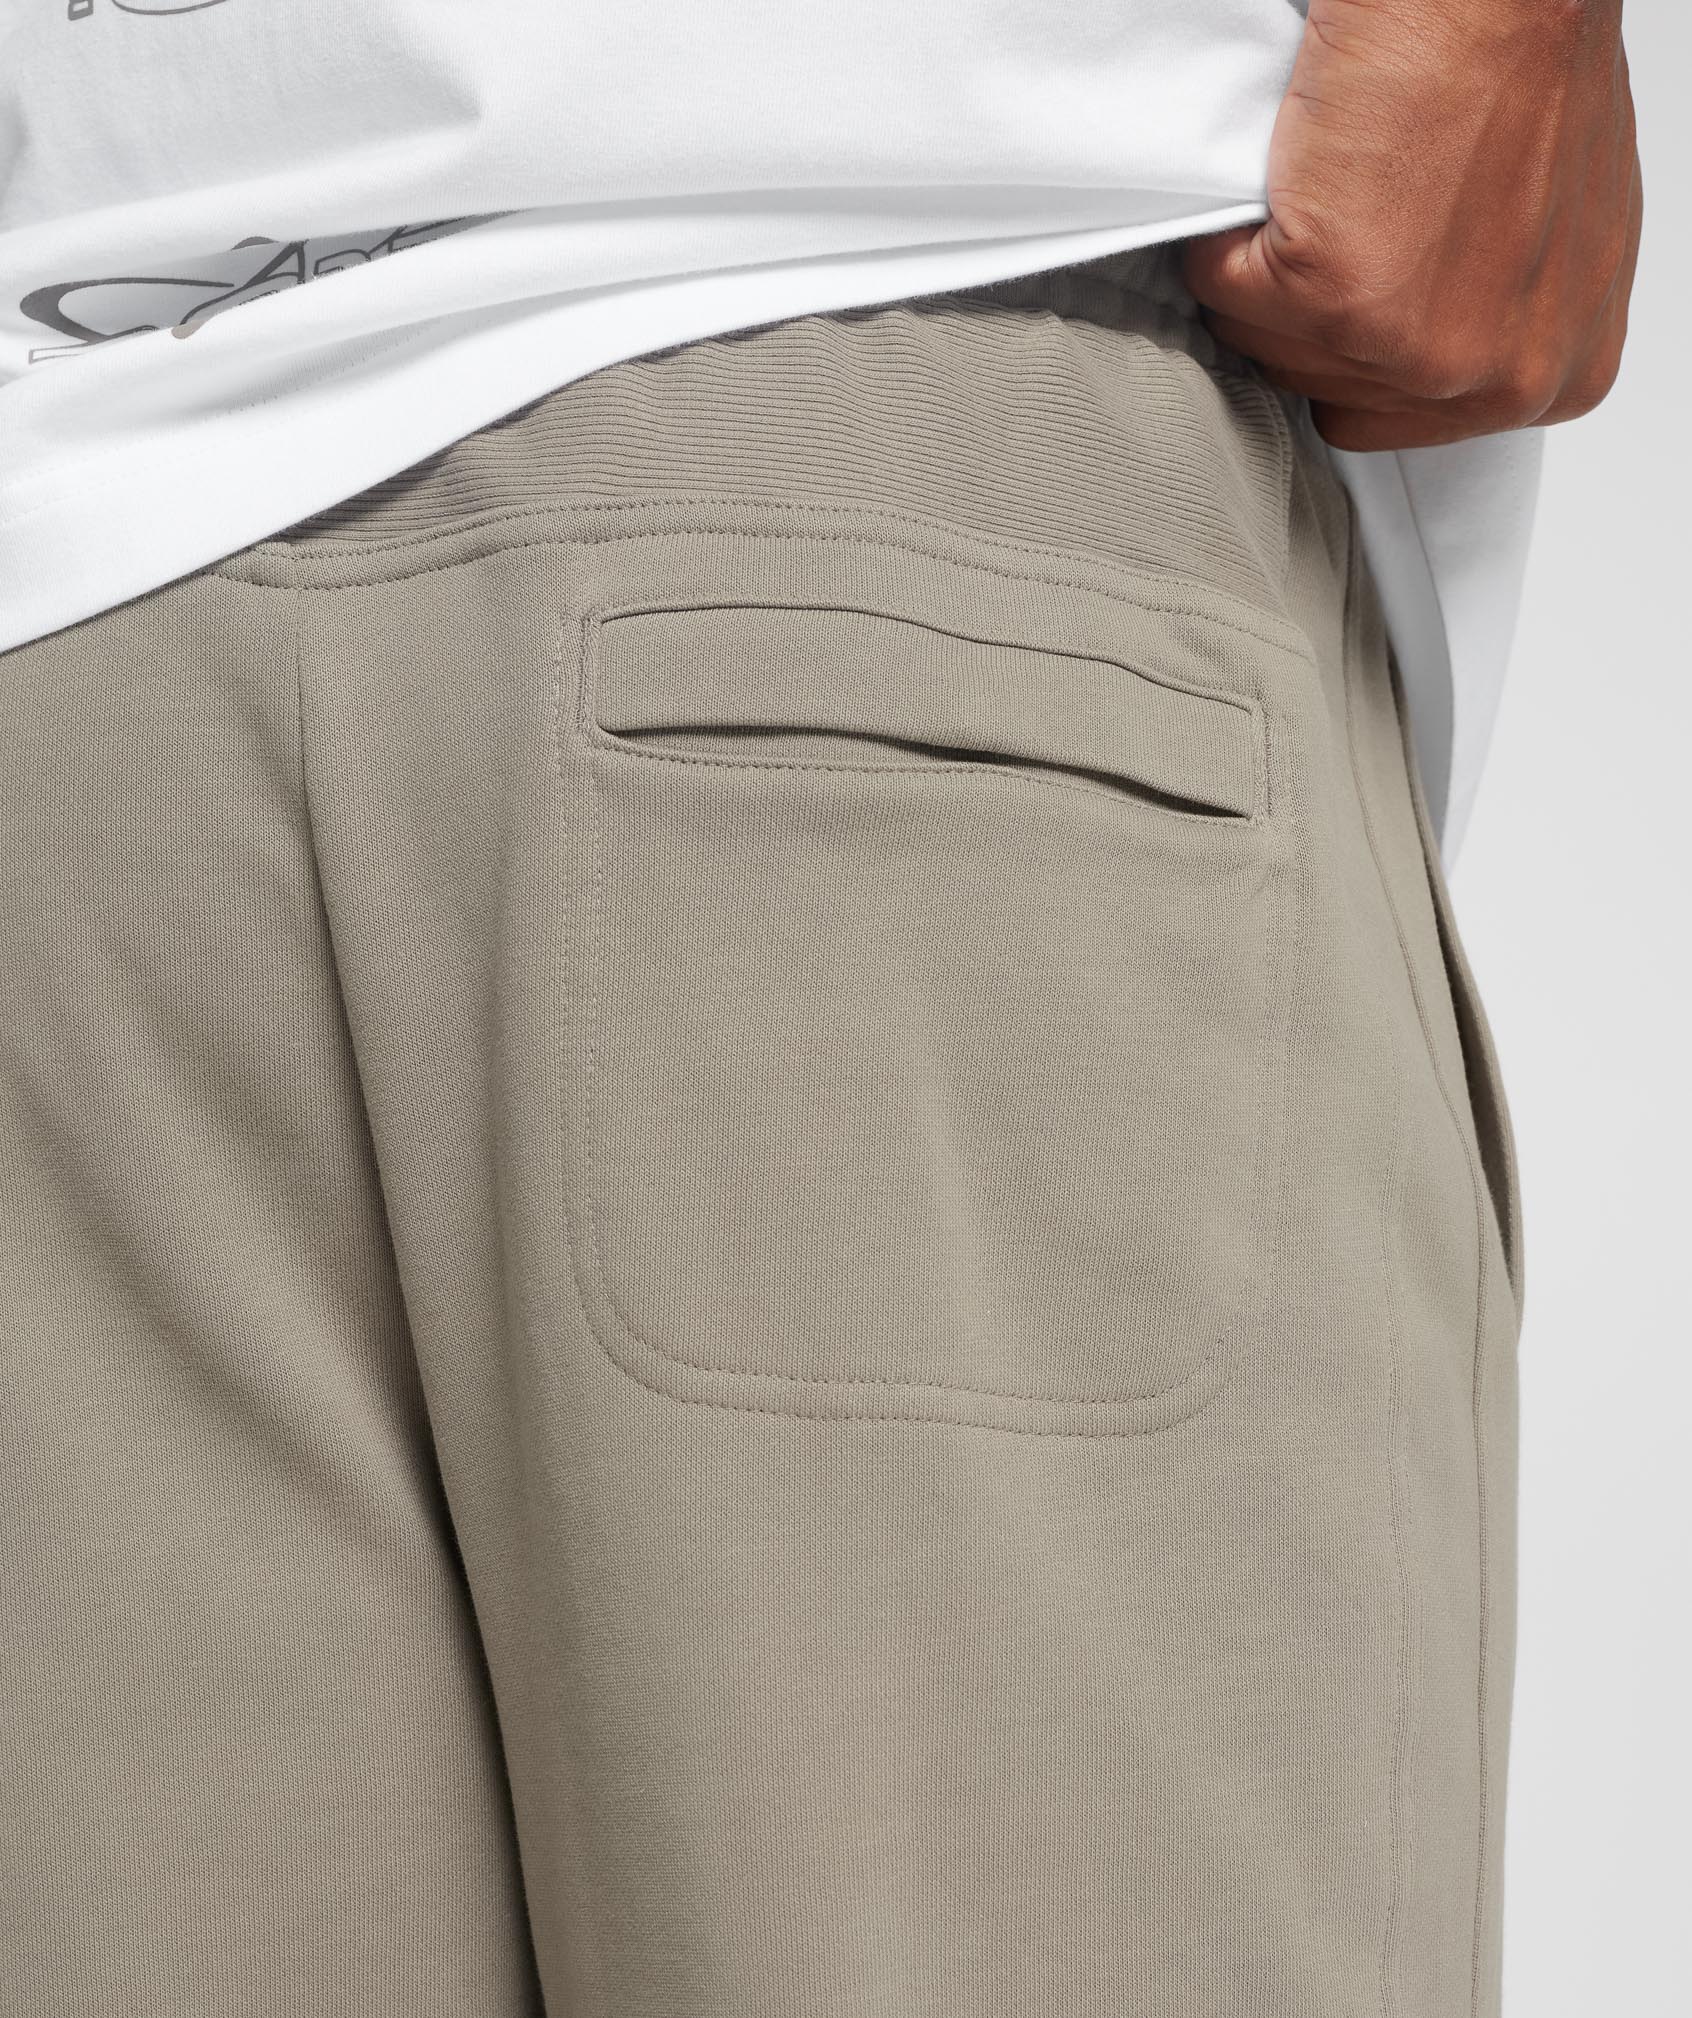 Rest Day Essentials Joggers in Linen Brown - view 6